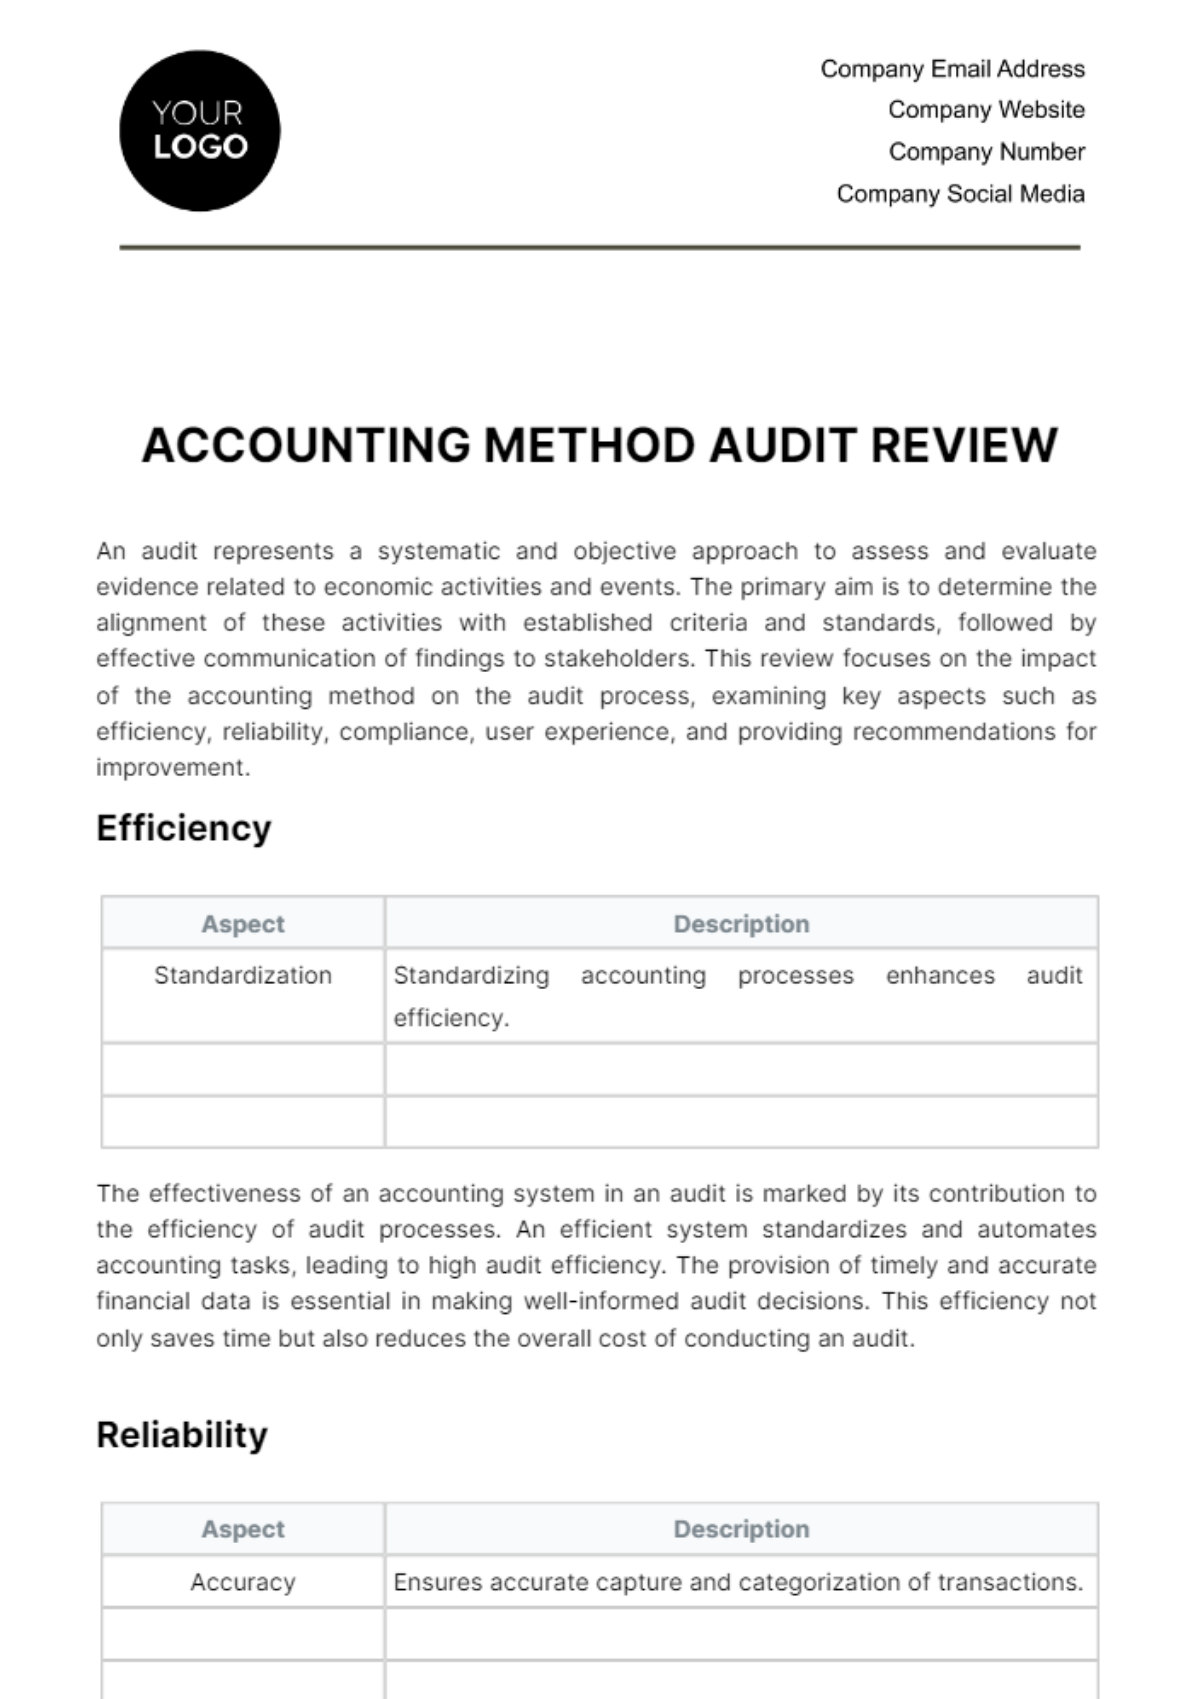 Accounting Method Audit Review Template